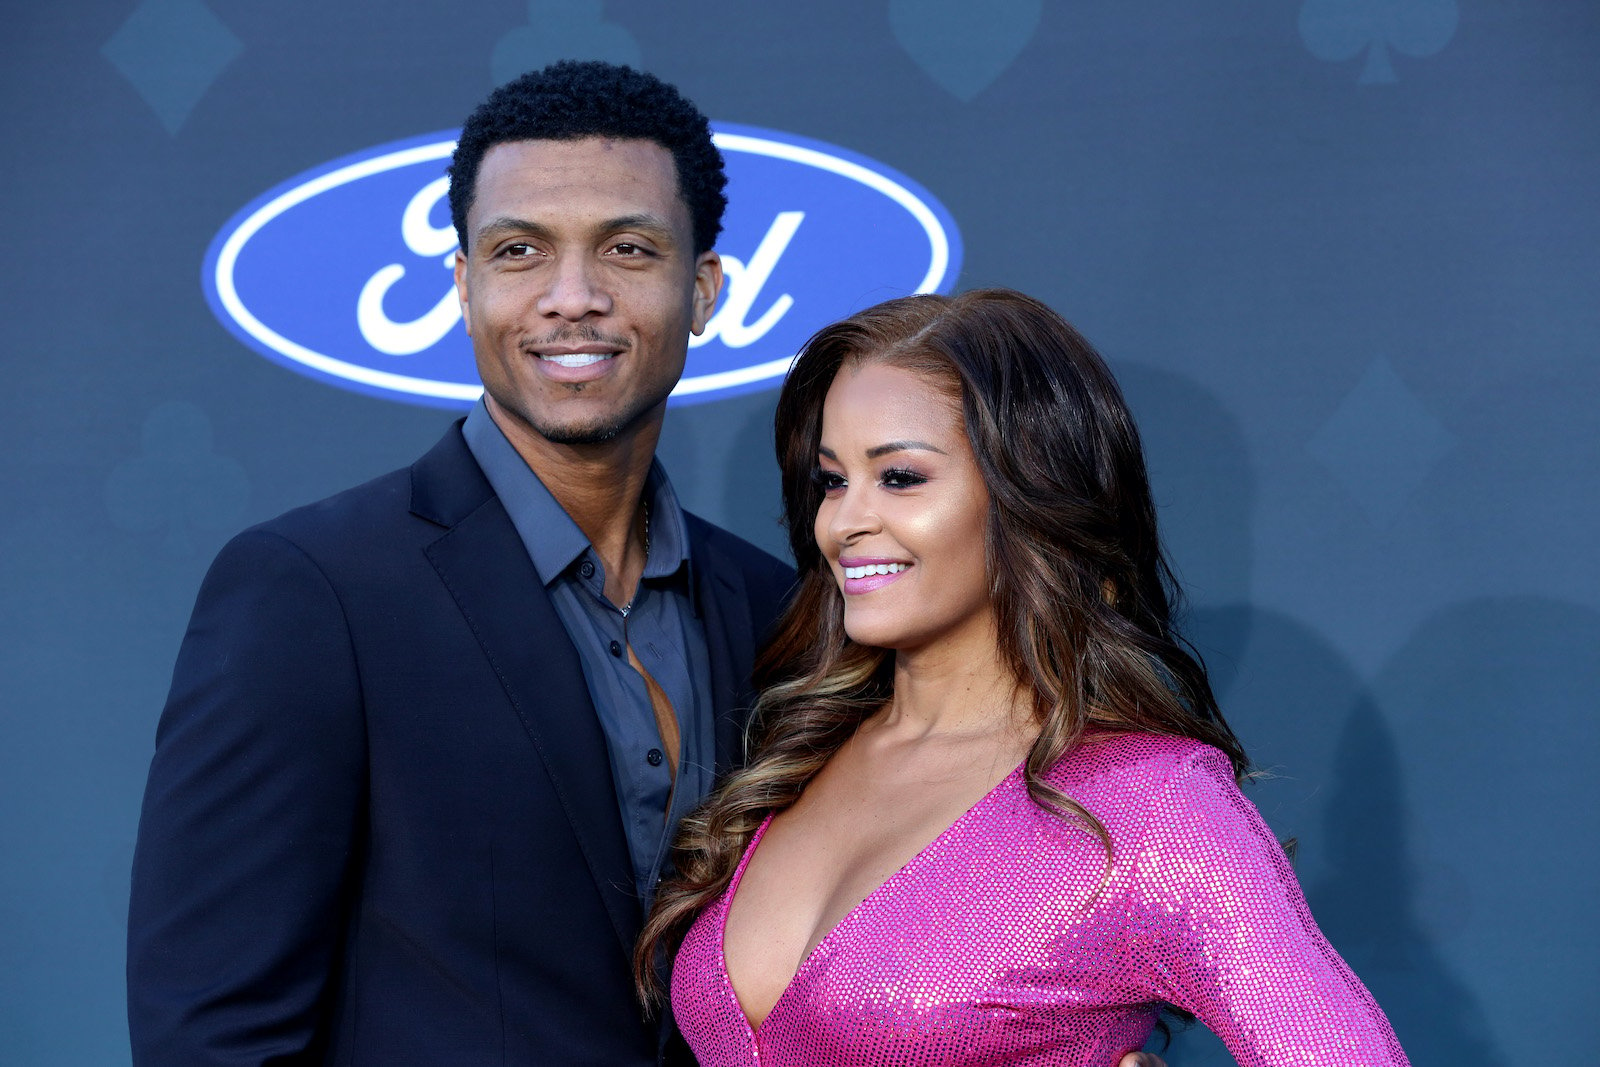 Kendal 'KJ' Dismute and Claudia Jordan from VH1 'Couples Retreat' on the red carpet in 2019